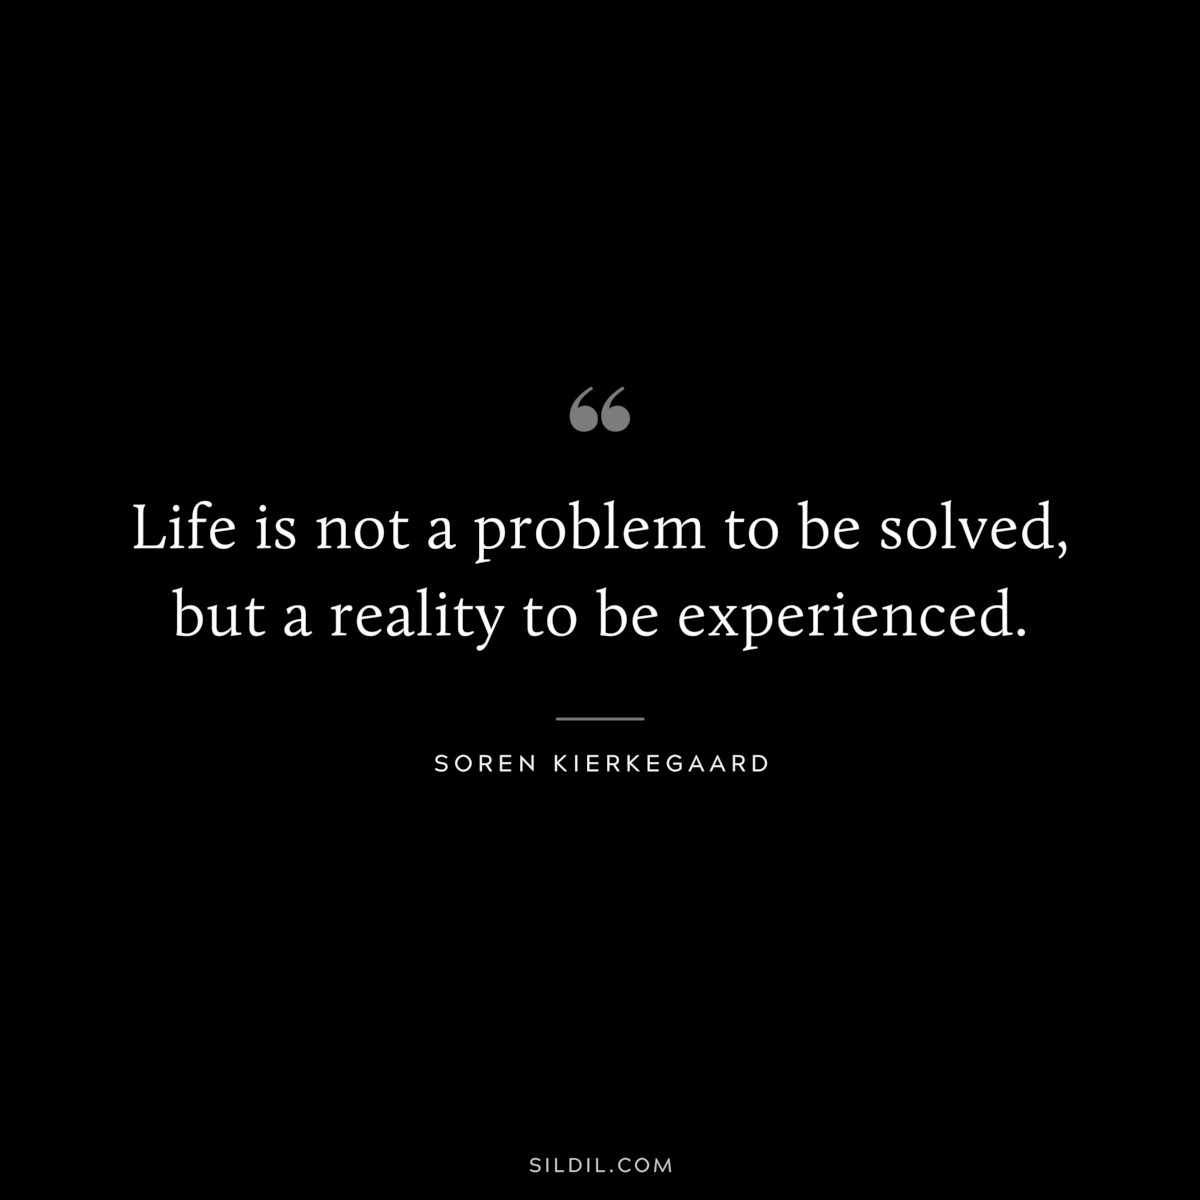 Life is not a problem to be solved, but a reality to be experienced. ― Soren Kierkegaard